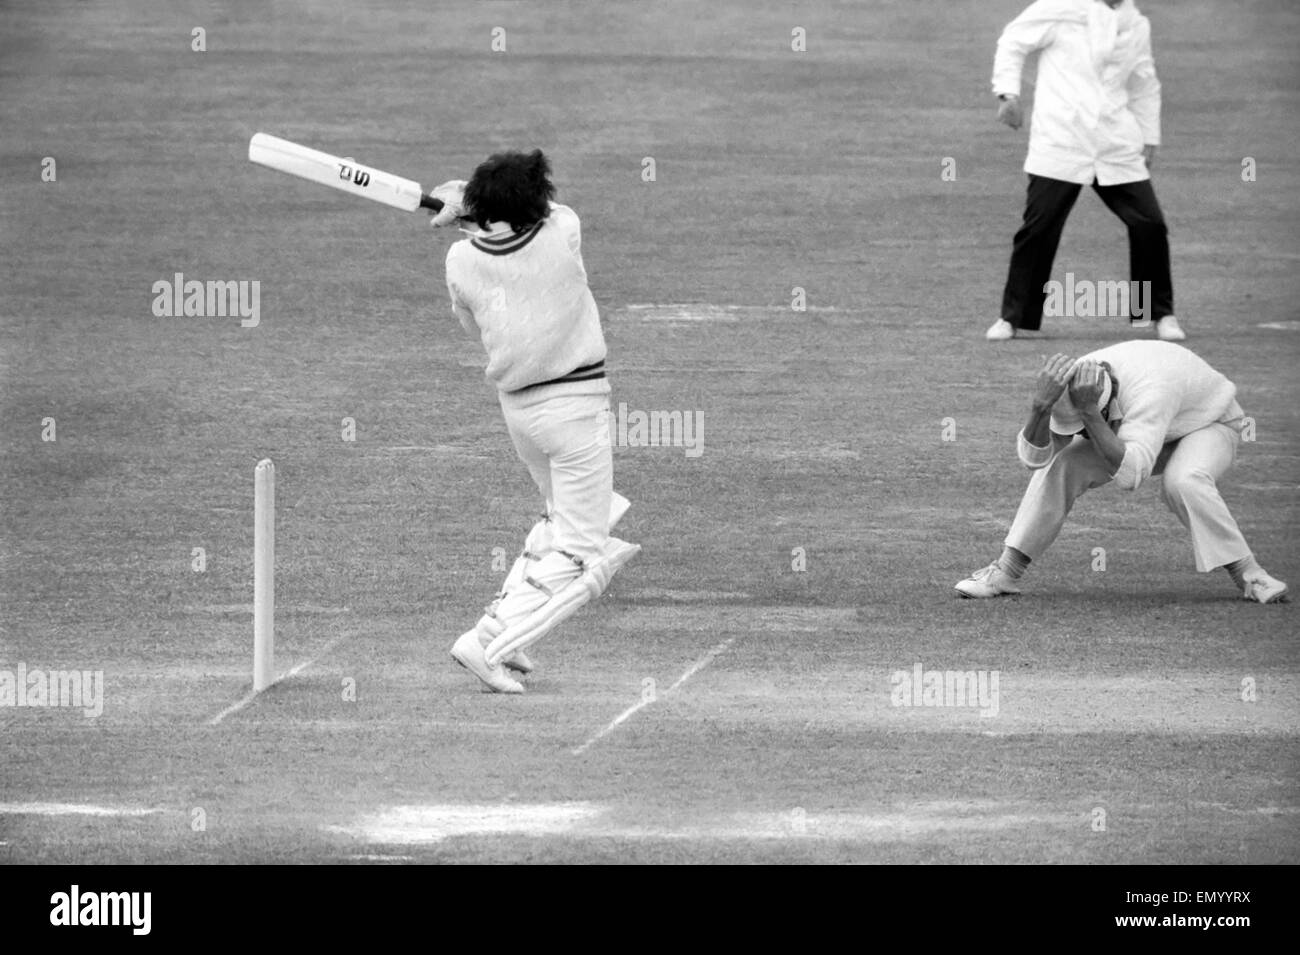 England v. Pakistan. Test match at Lords. June 1978 78-3029-007 Stock Photo